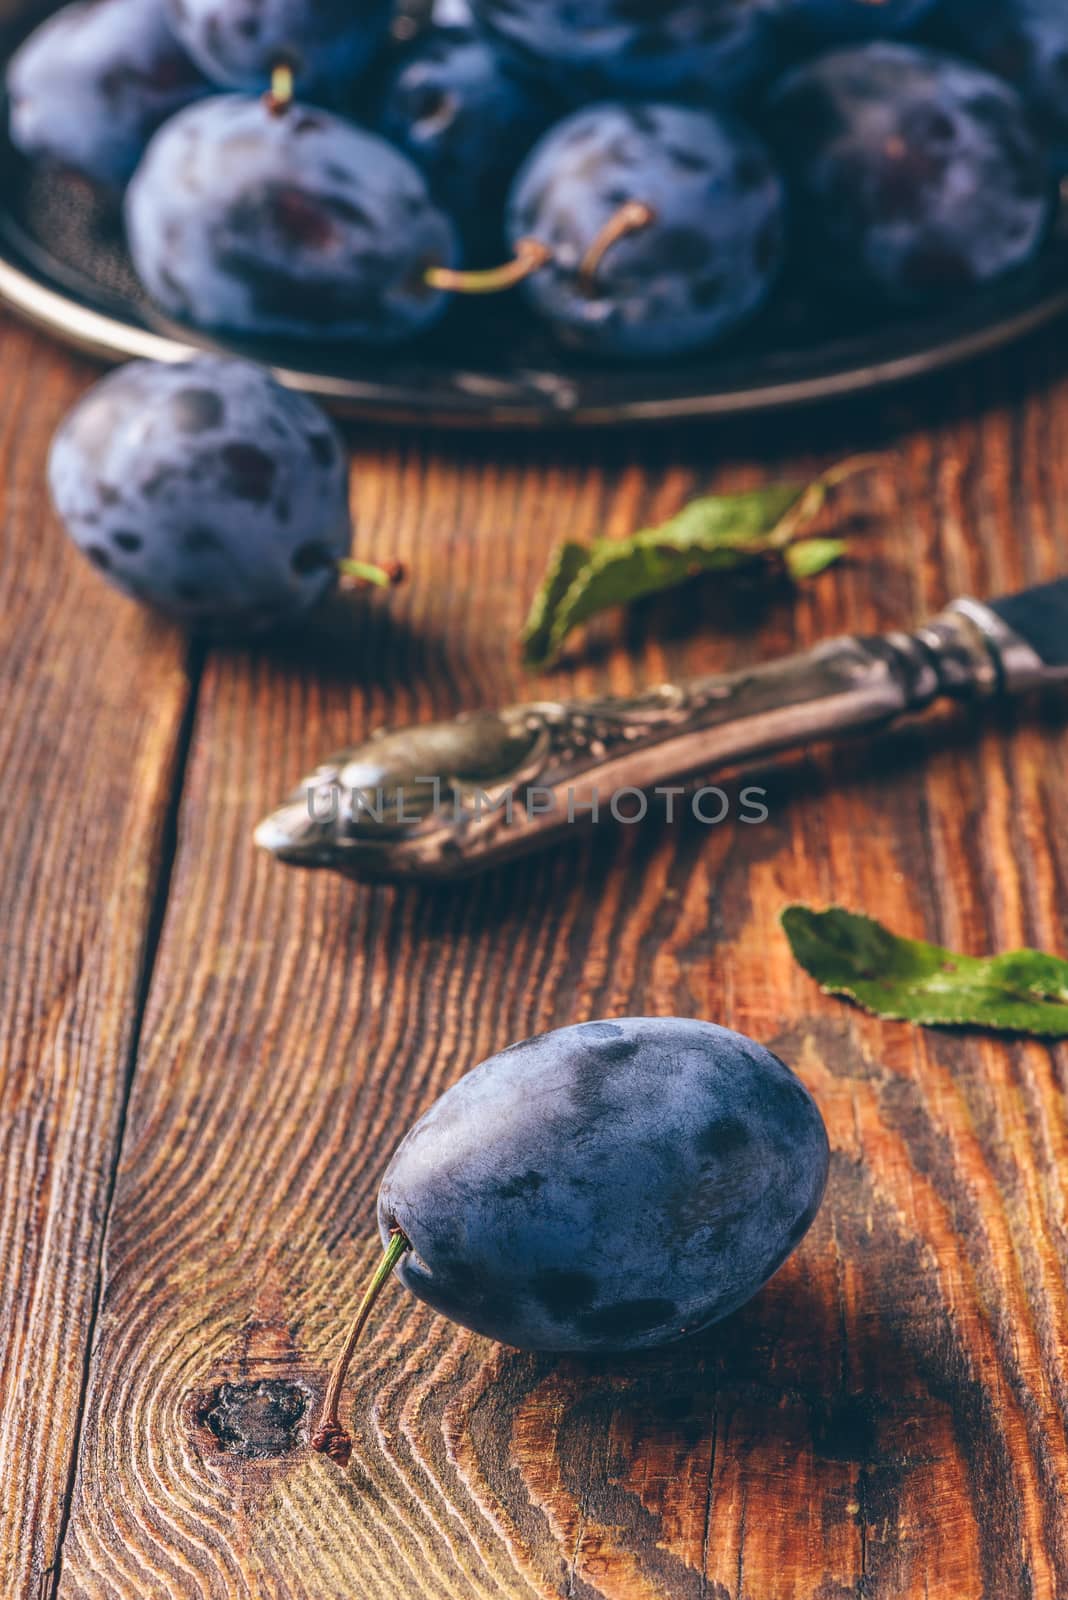 Ripe plums on metal tray and dark wooden surface with leaves and vintage knife